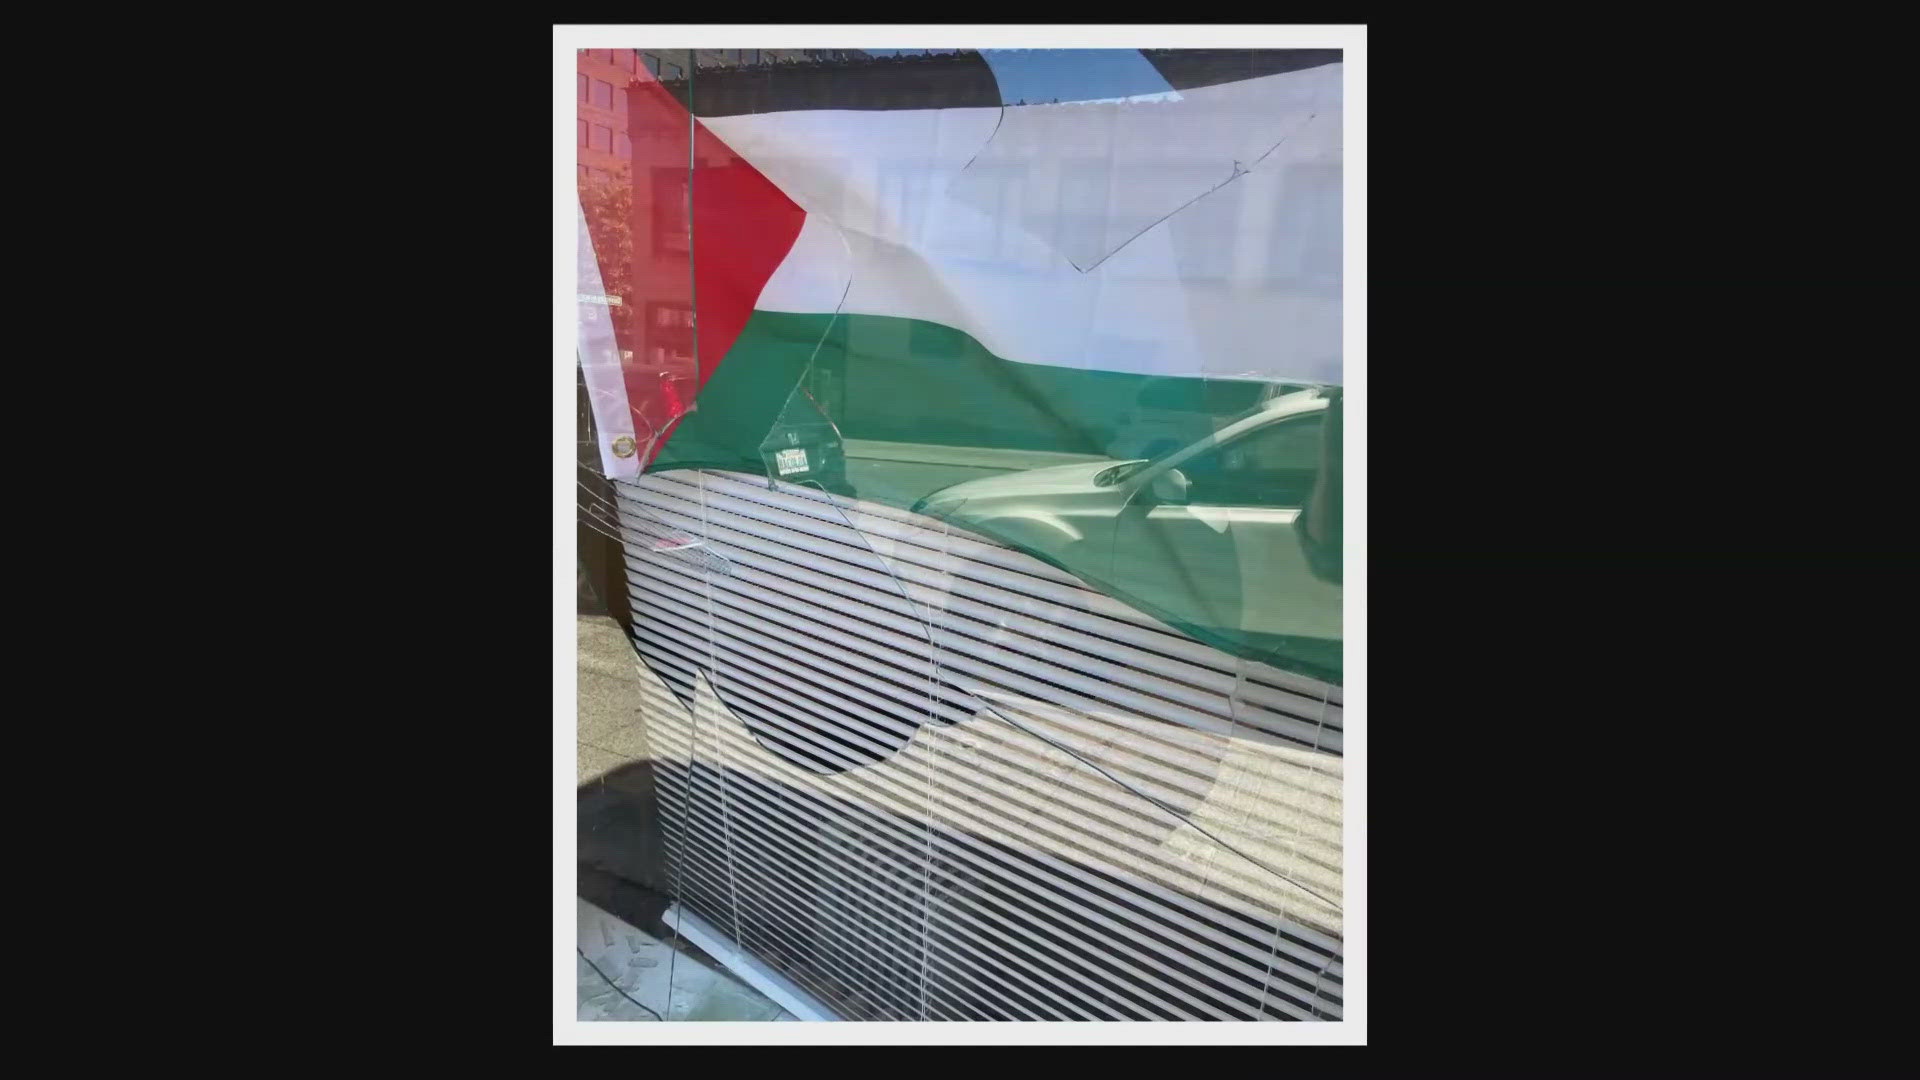 A Palestinian flag and a poster that reads "End U.S. military aid to Israel" were in the windows that had bricks thrown through them.